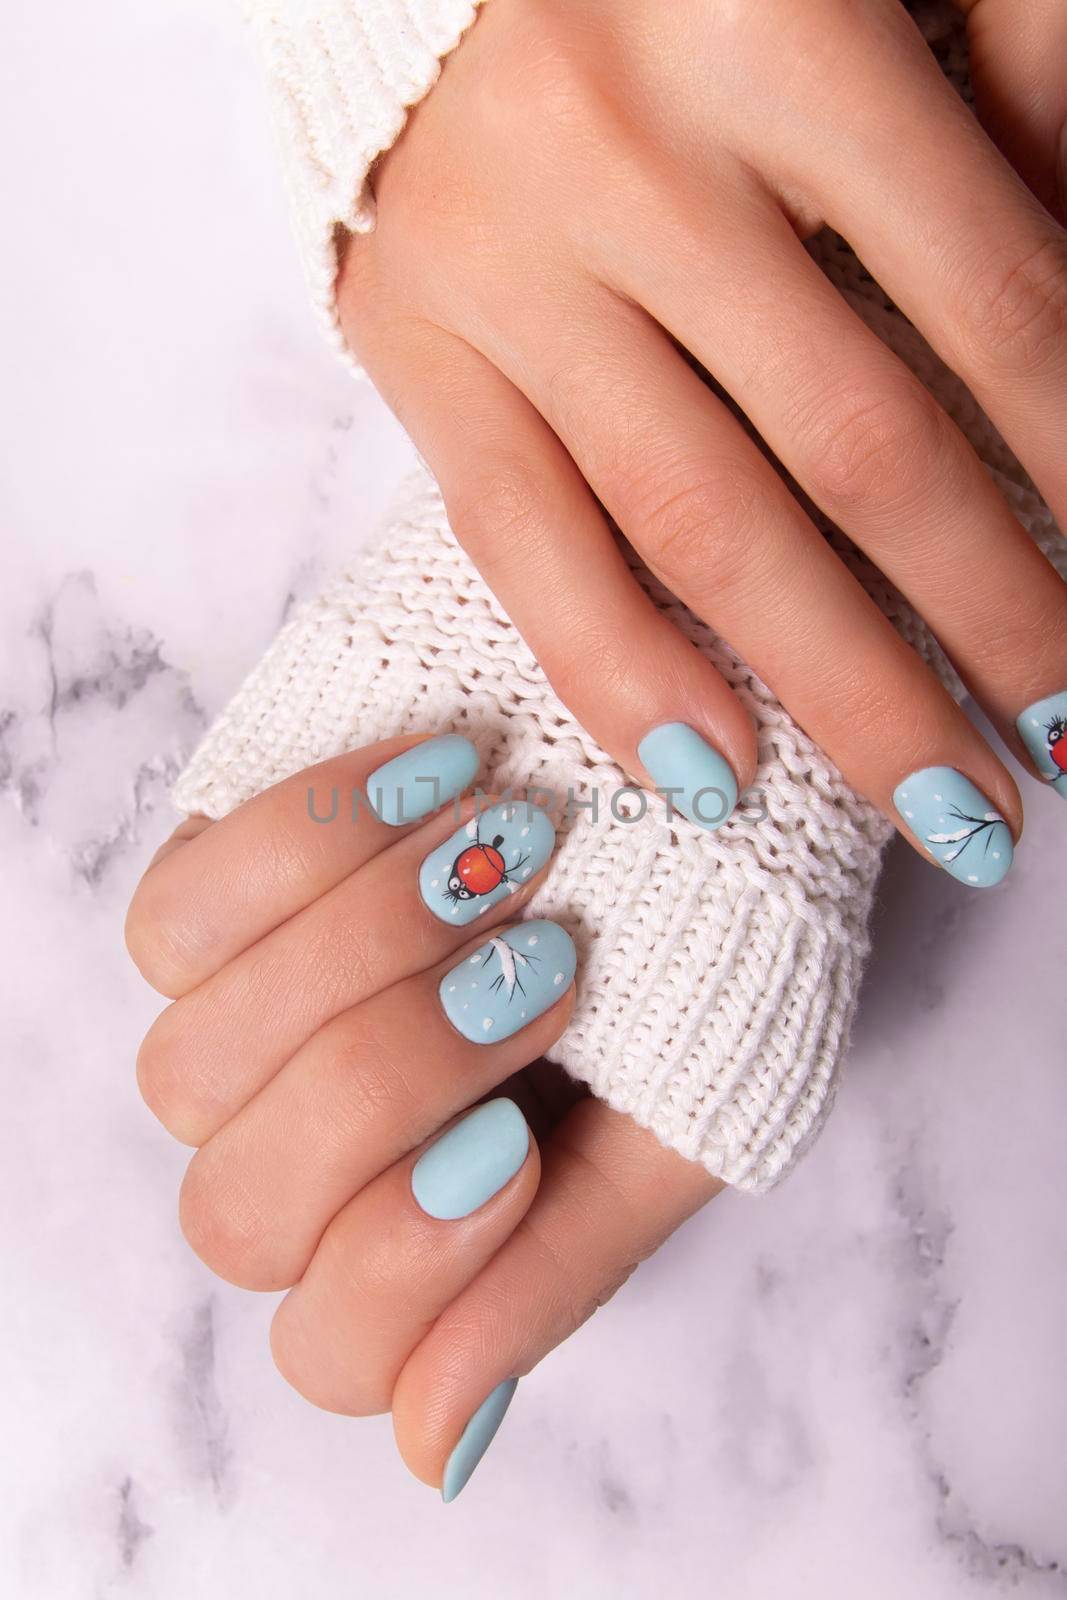 Female hands with winter snow manicure with stickers. Professional gel nail polish.